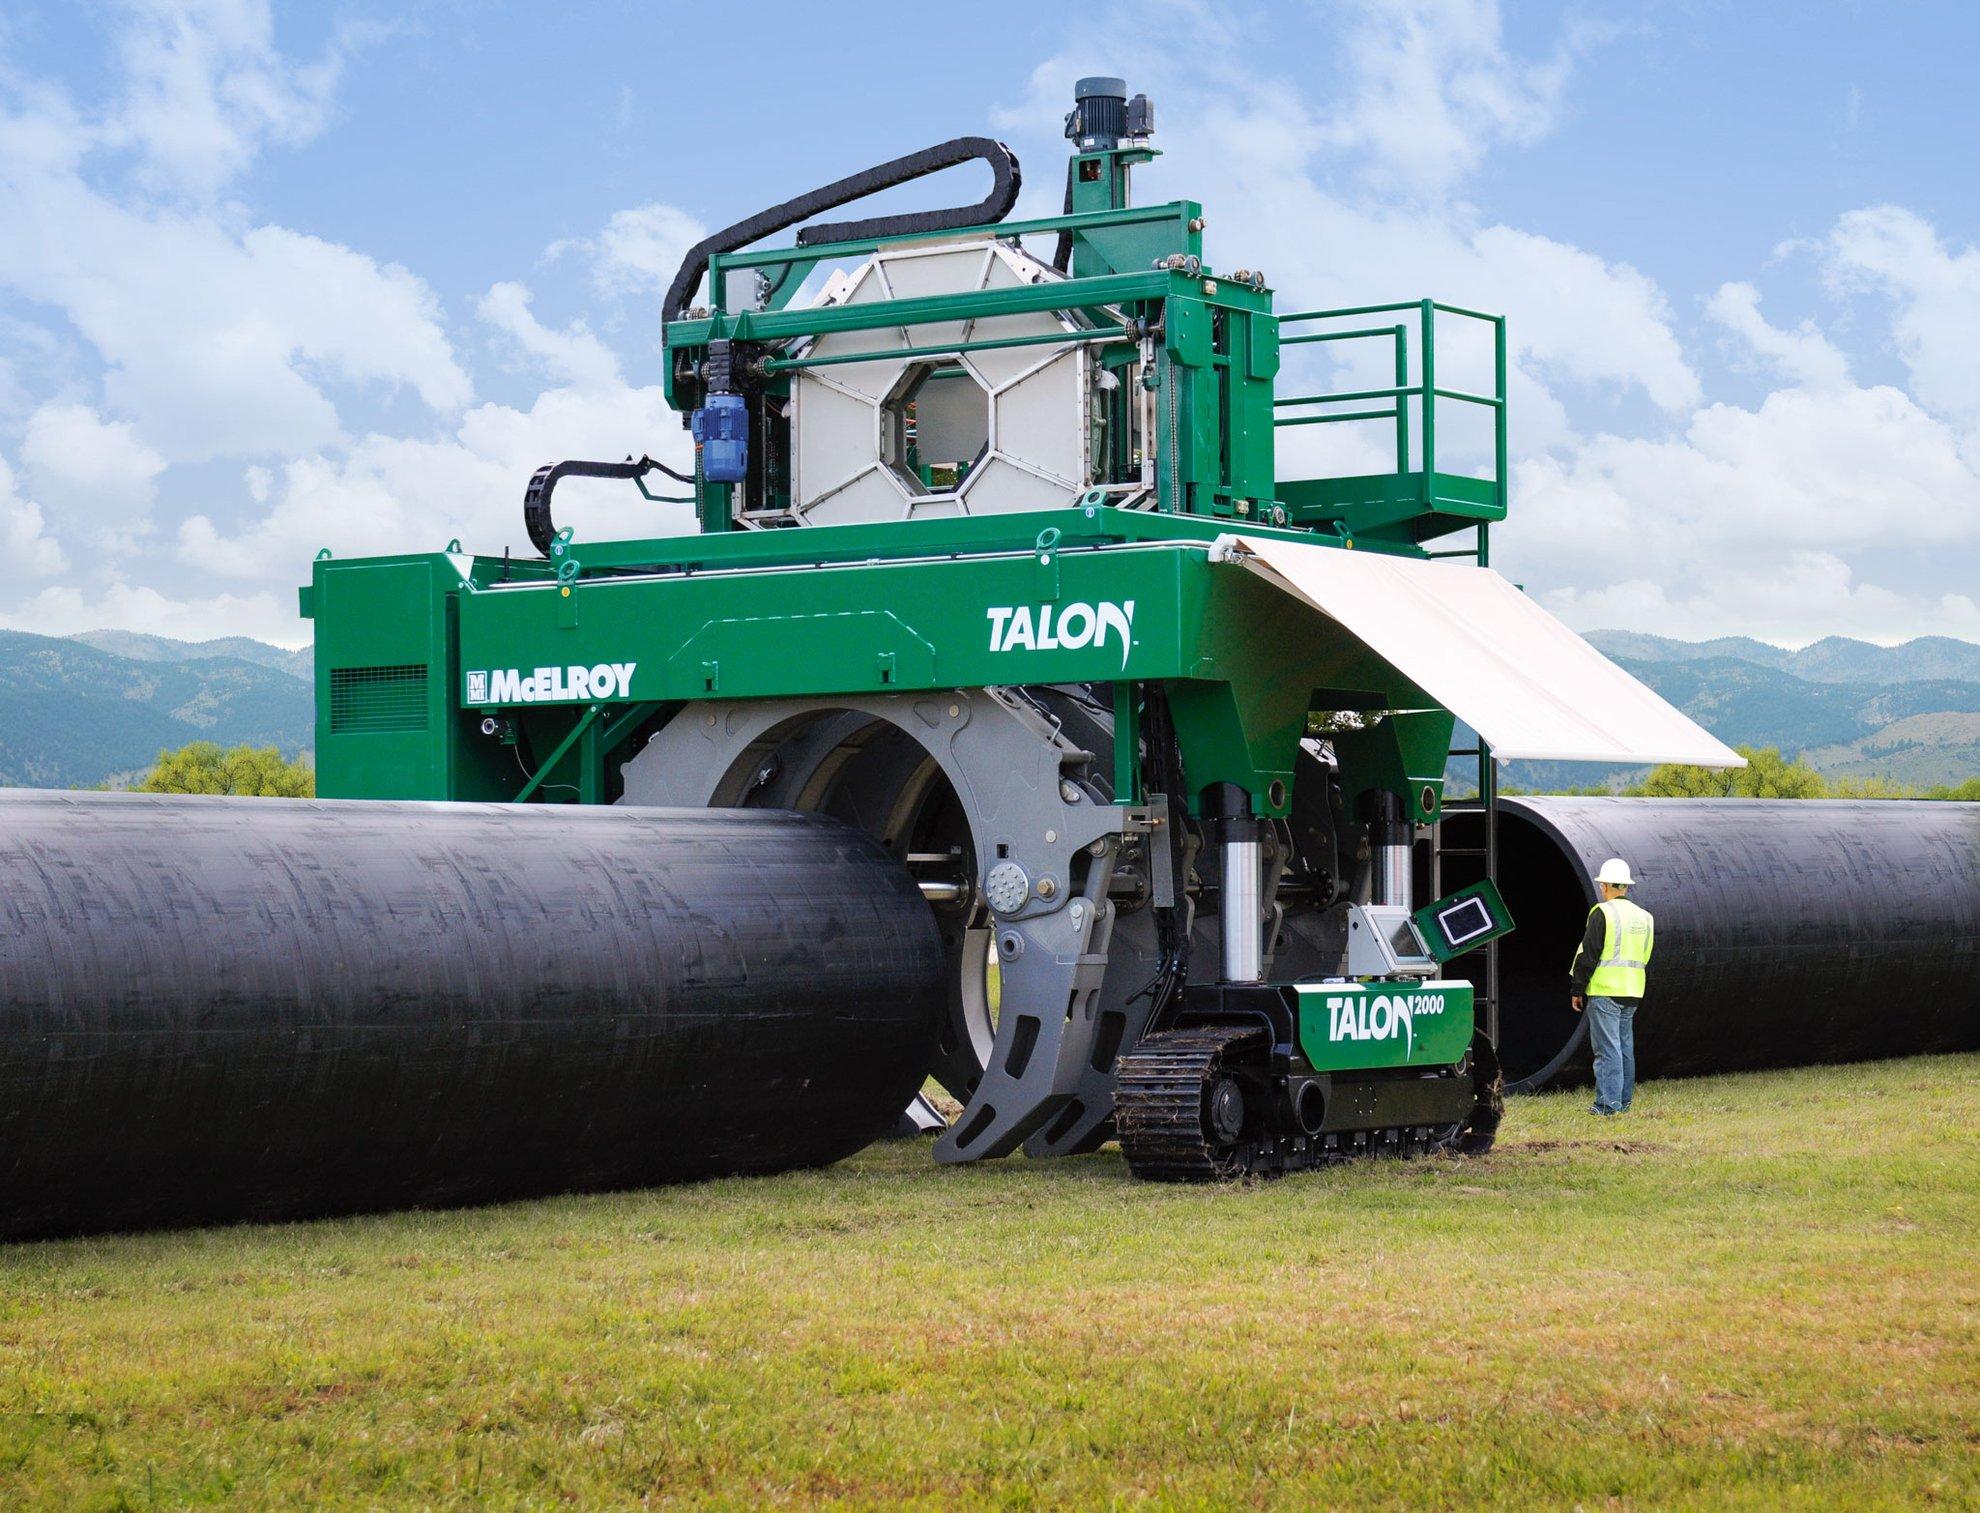 A large McElroy Talon fusion machine posed over two large pipes in a field.